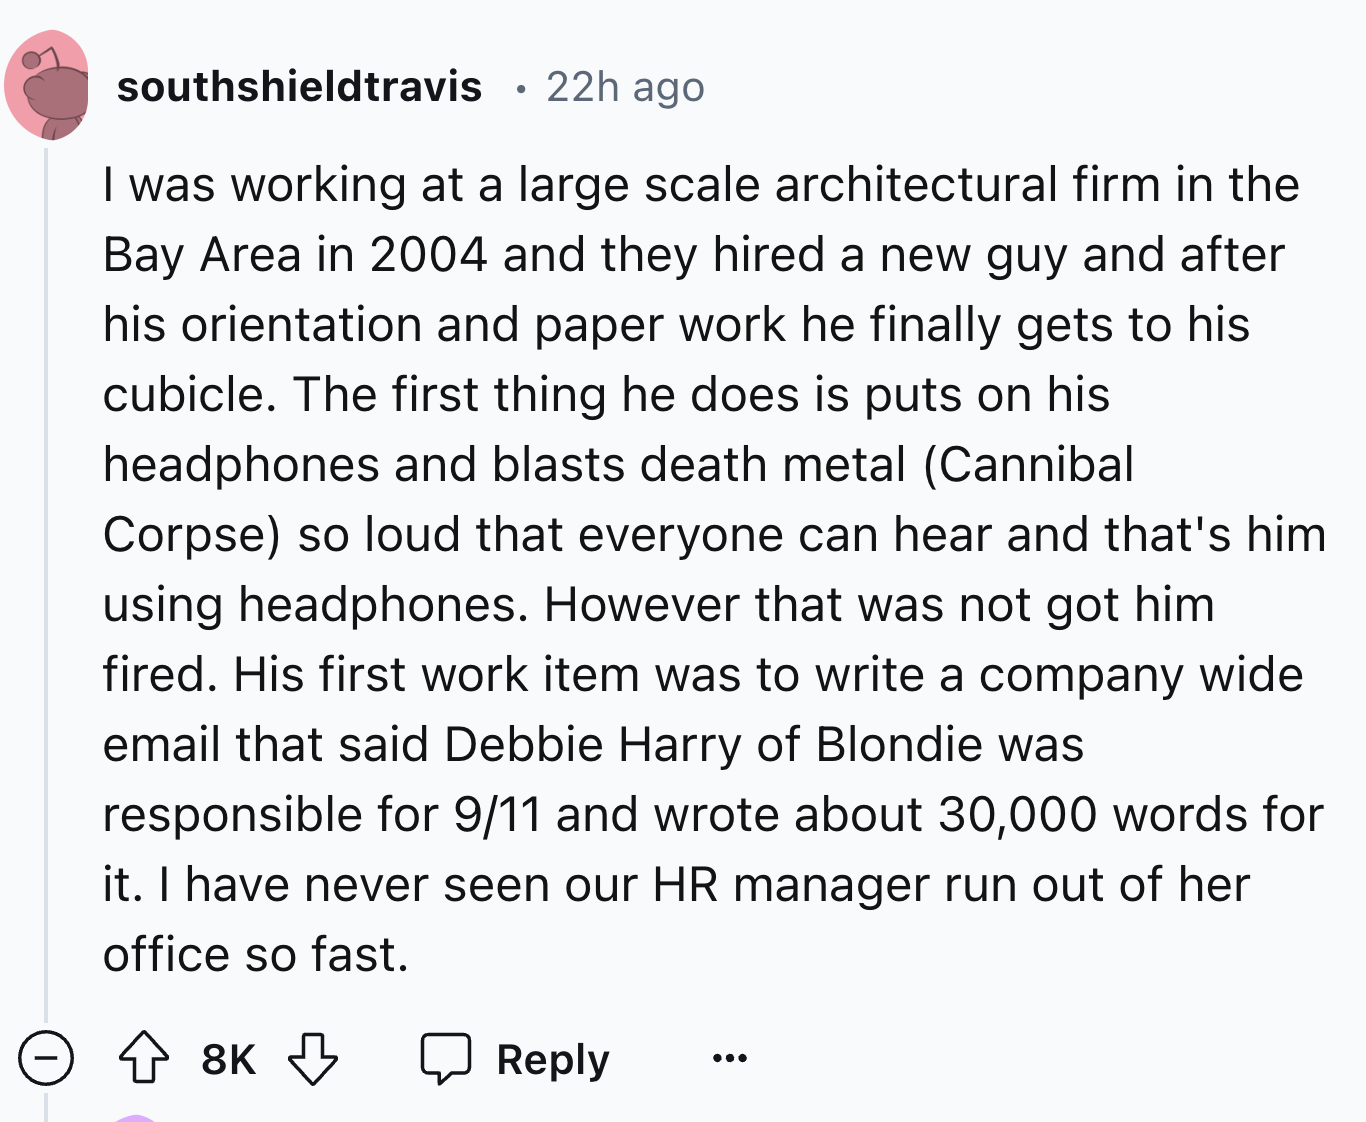 screenshot - southshieldtravis 22h ago I was working at a large scale architectural firm in the Bay Area in 2004 and they hired a new guy and after his orientation and paper work he finally gets to his cubicle. The first thing he does is puts on his headp